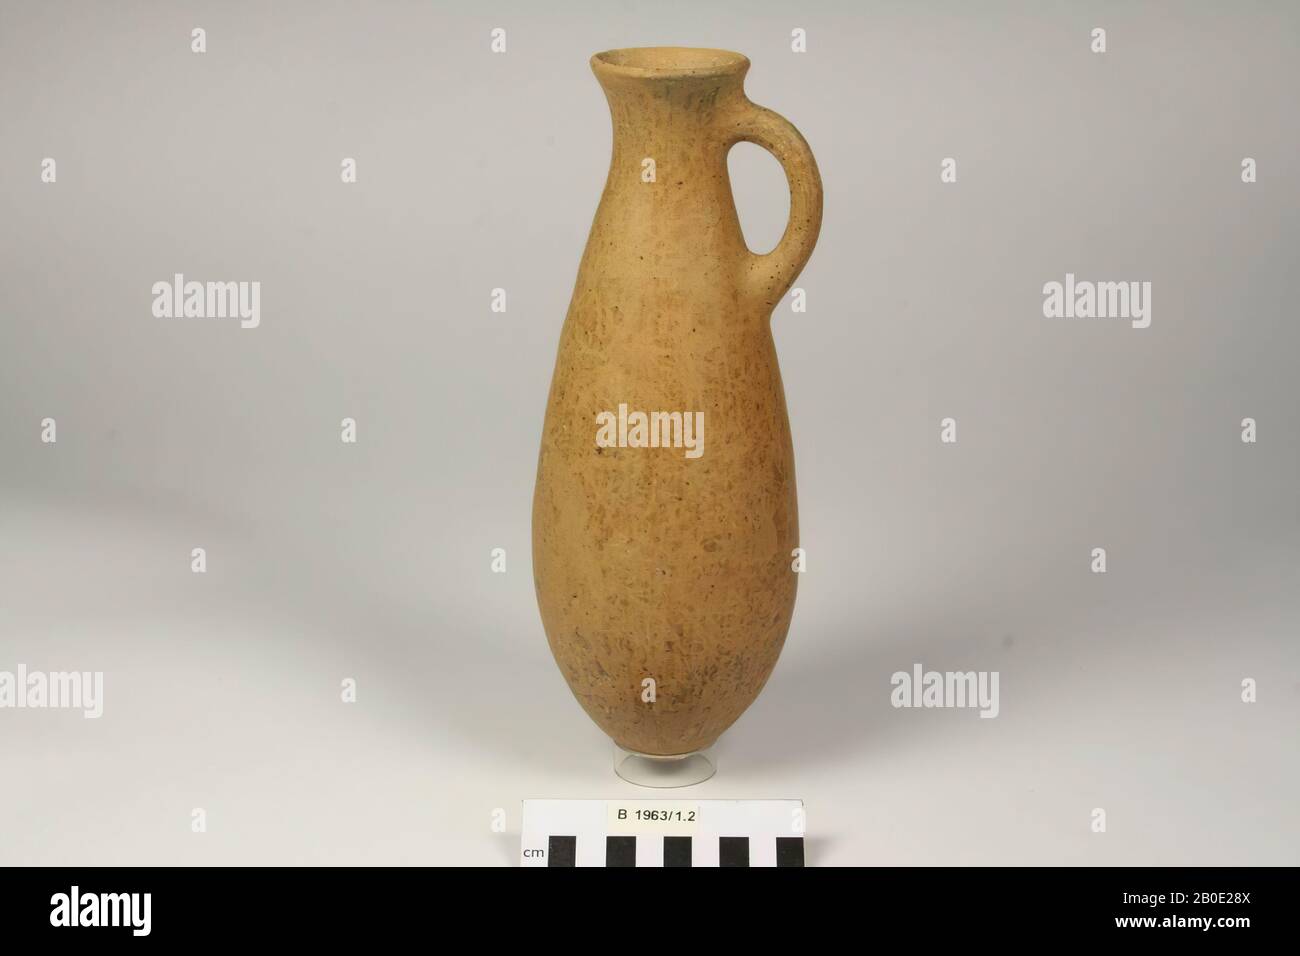 A stretched bag-shaped bottle of orange-brown clay. The edge is slightly curved outwards and the object has one earpiece, crockery, earthenware, H 27.9 cm, D 10 cm, Parthische Period 200 BC. - 200 AD, Iran Stock Photo